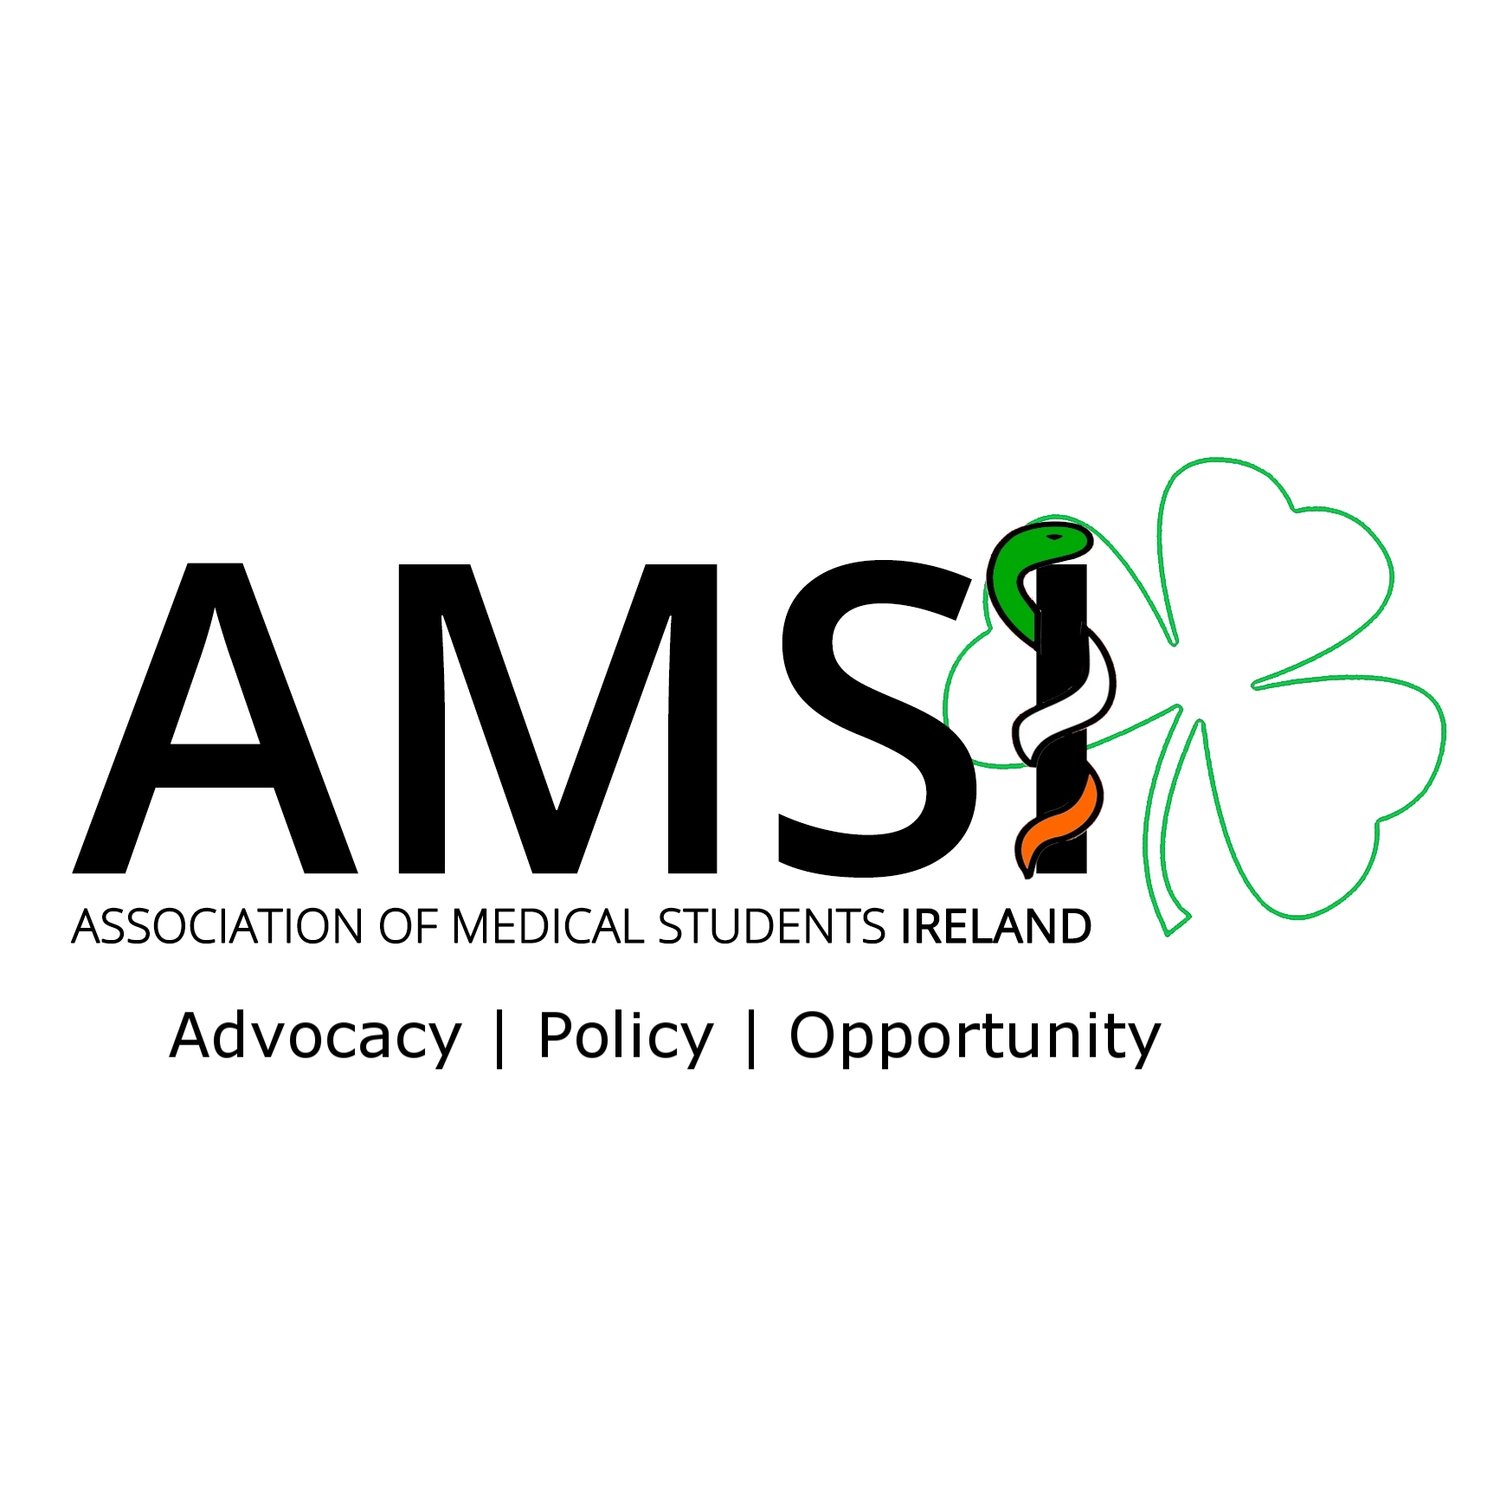 The Association of Medical Students, Ireland